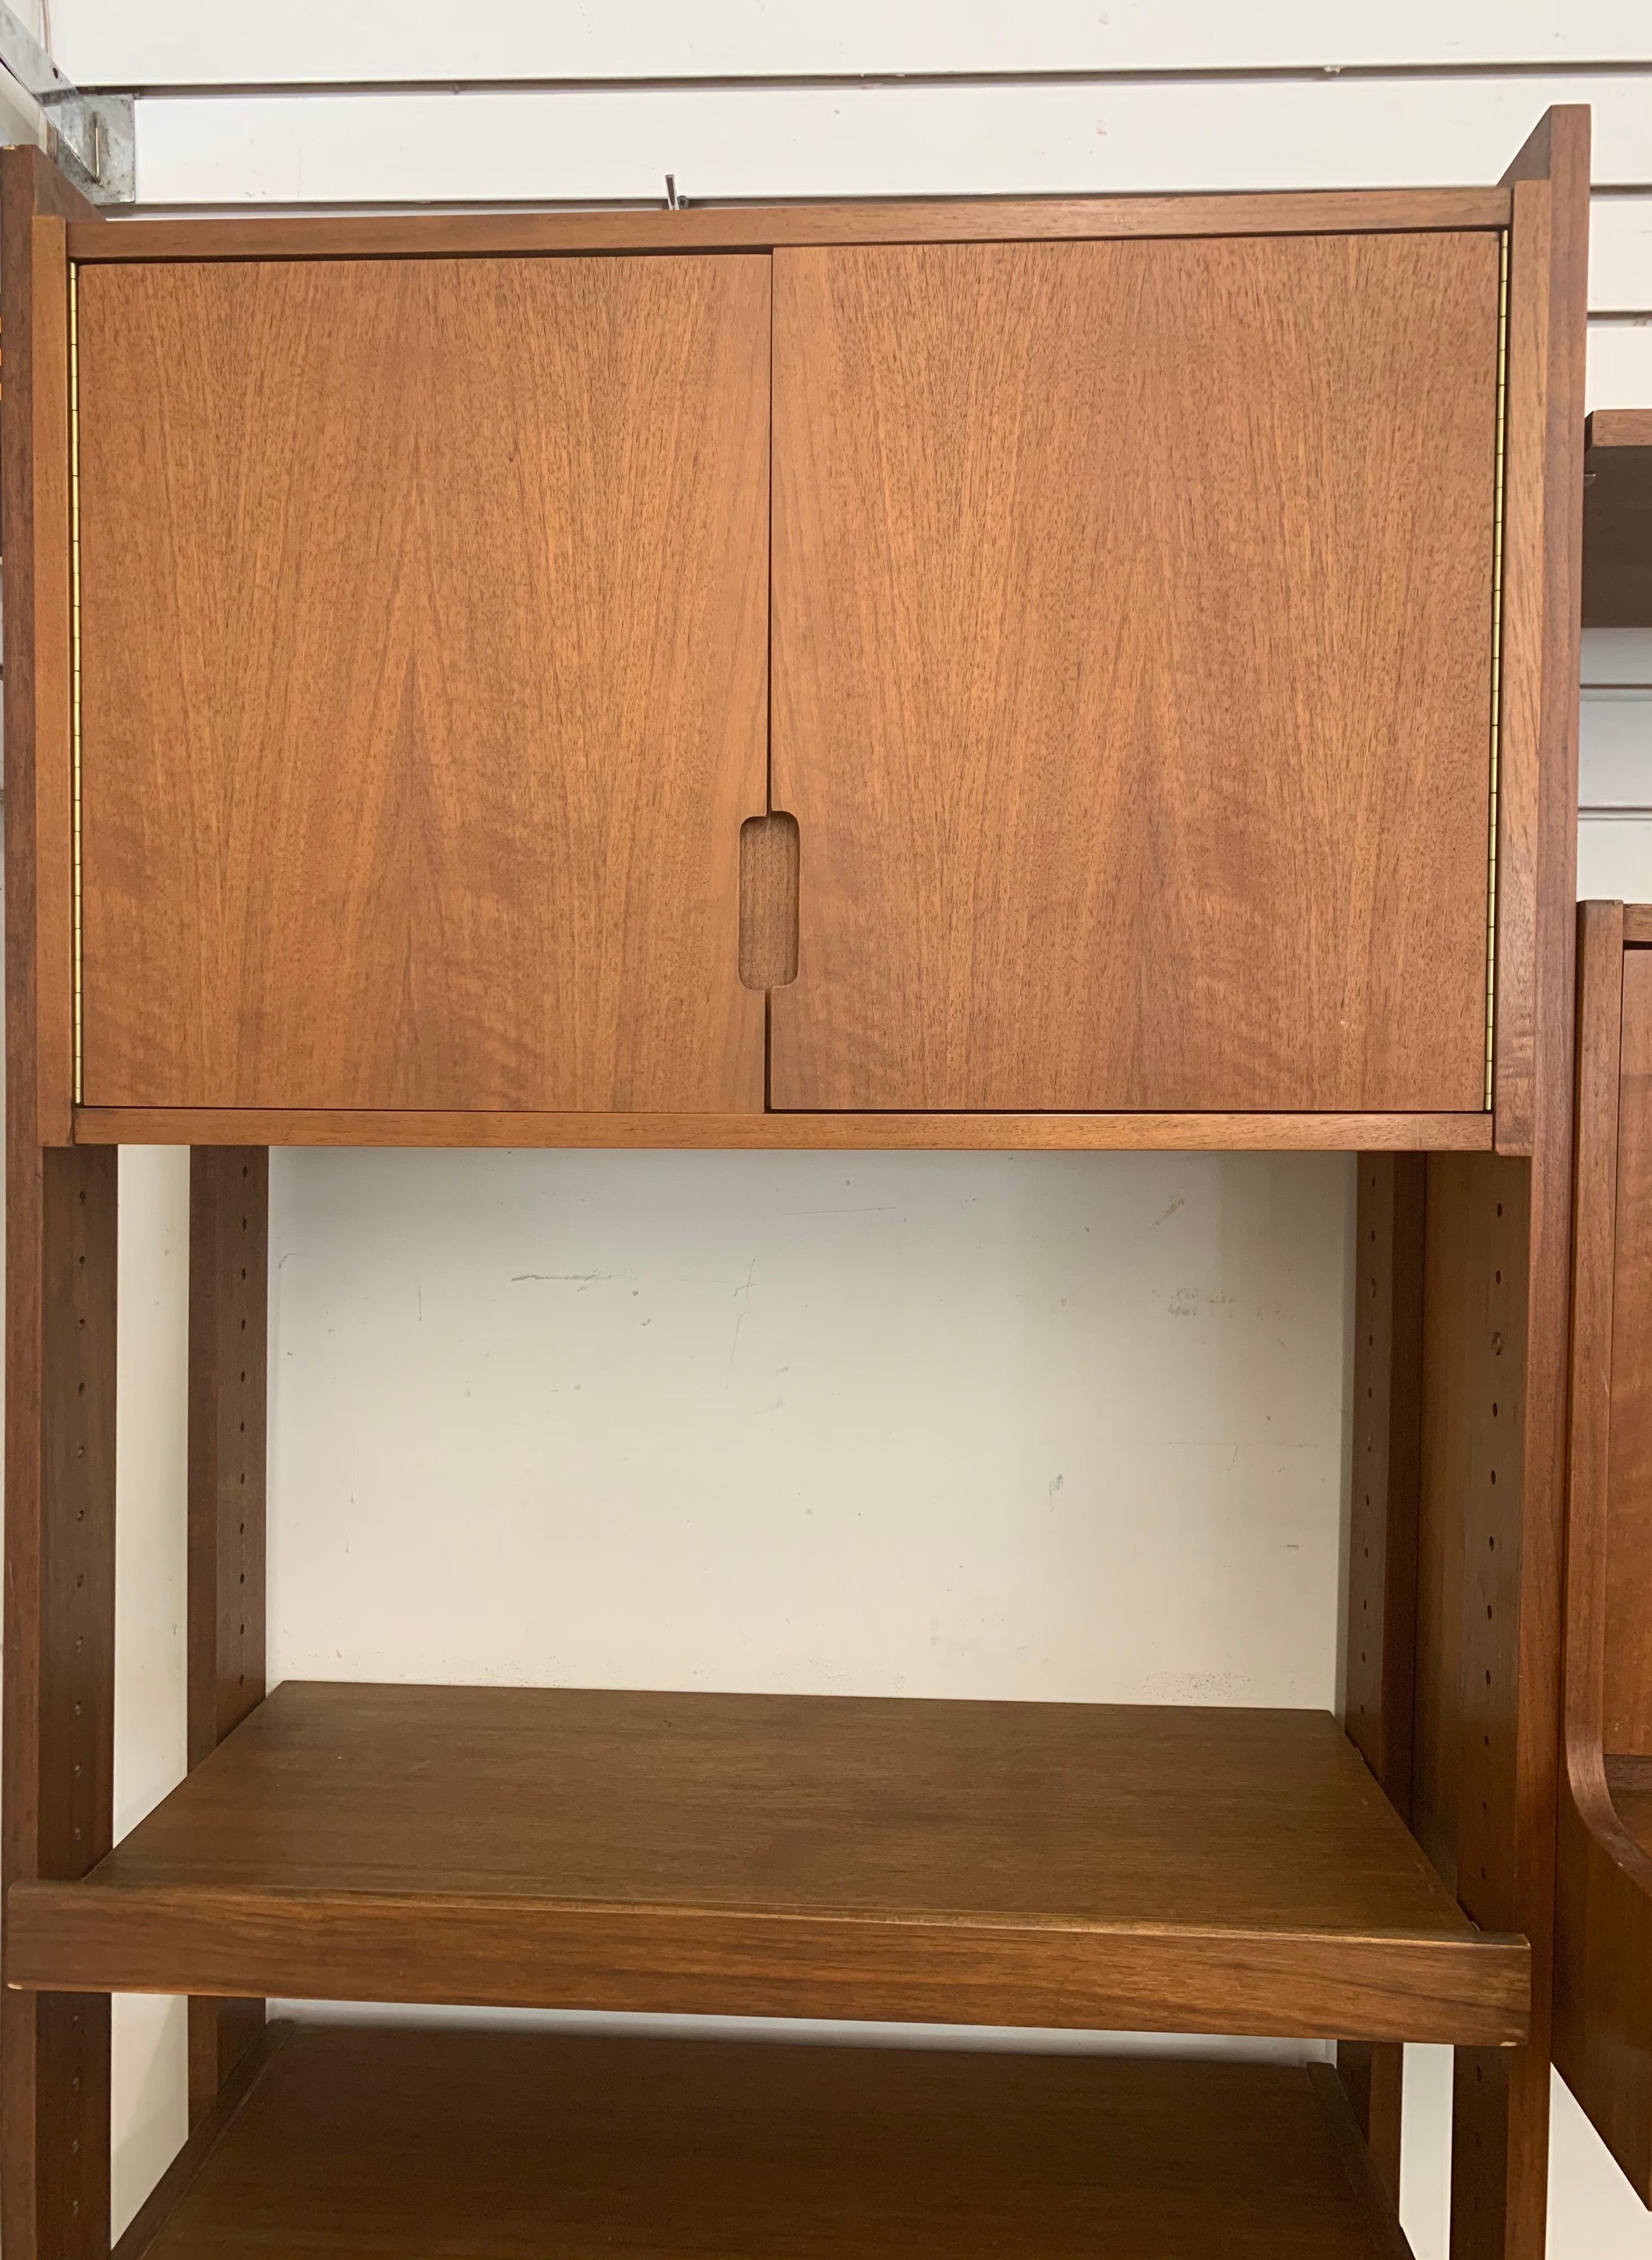 Coveted Danish modern three-bay wall unit with adjustable shelves. This wall unit is finished on all sides and can be used as a room divider or against the wall. Storage options abound with shelves, cabinets and a pull down desk which can be